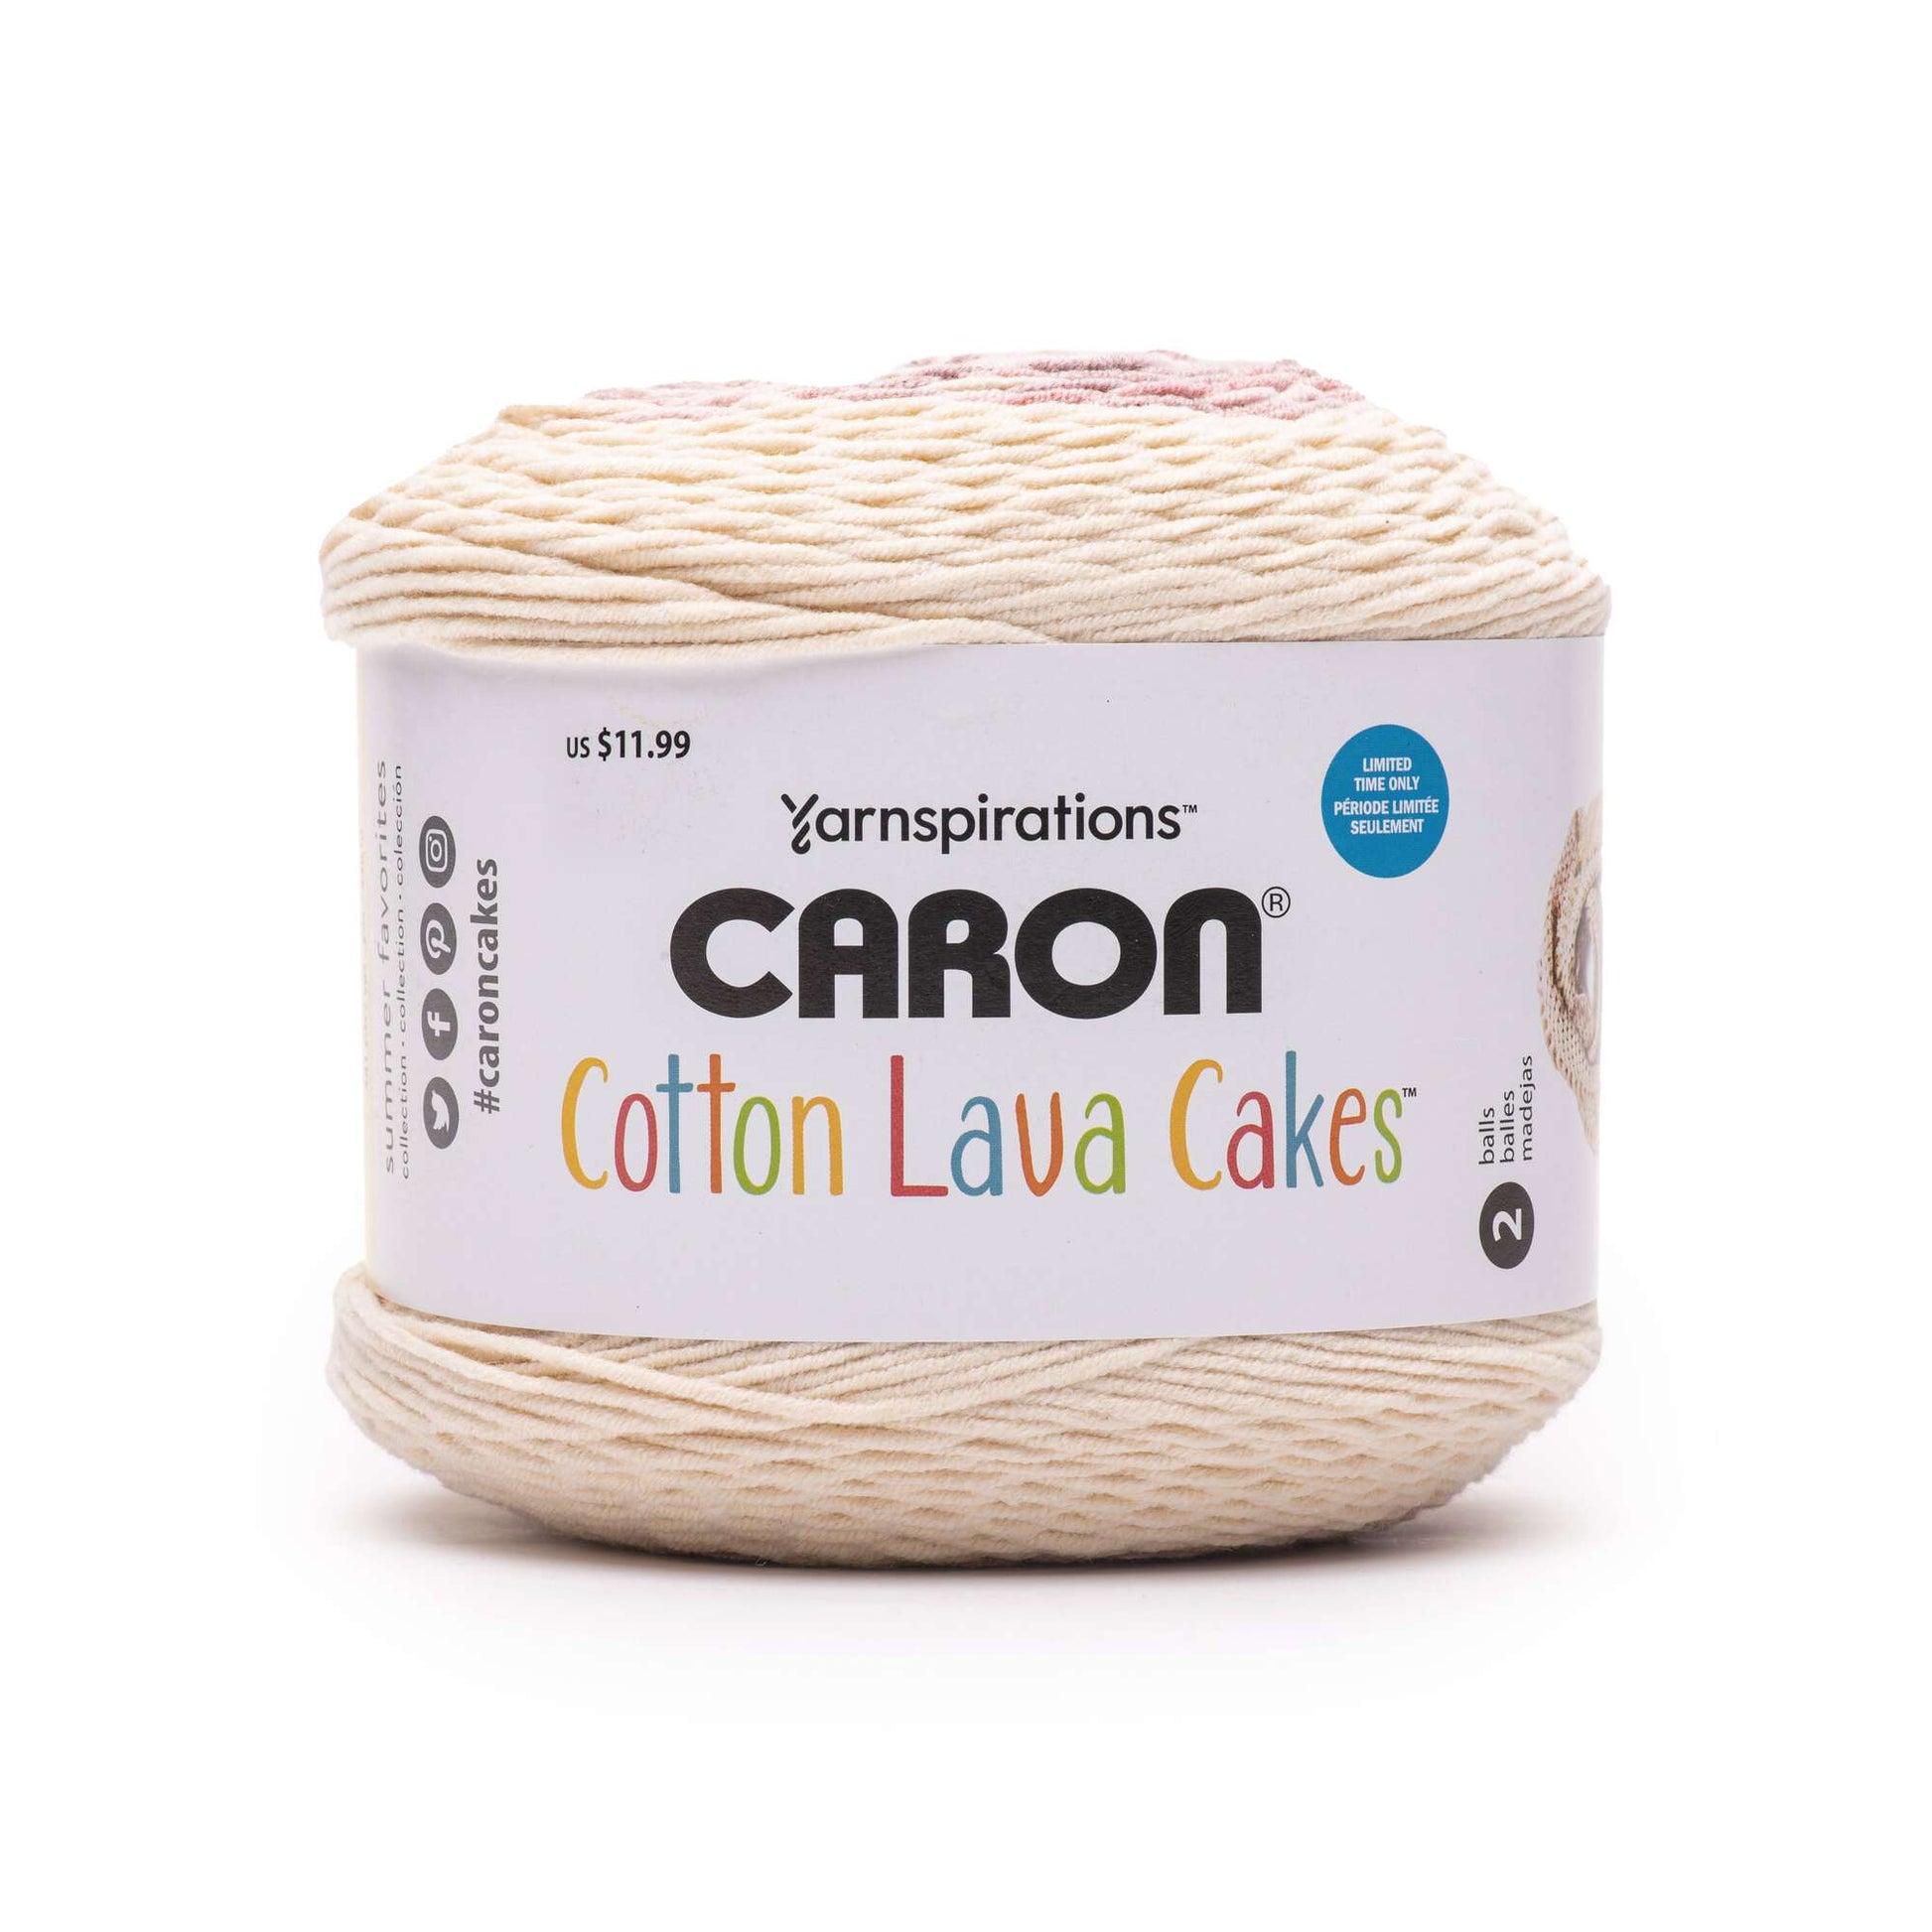 Caron Cakes Yarn in Buttercup Color, Shades of Beige and Browns